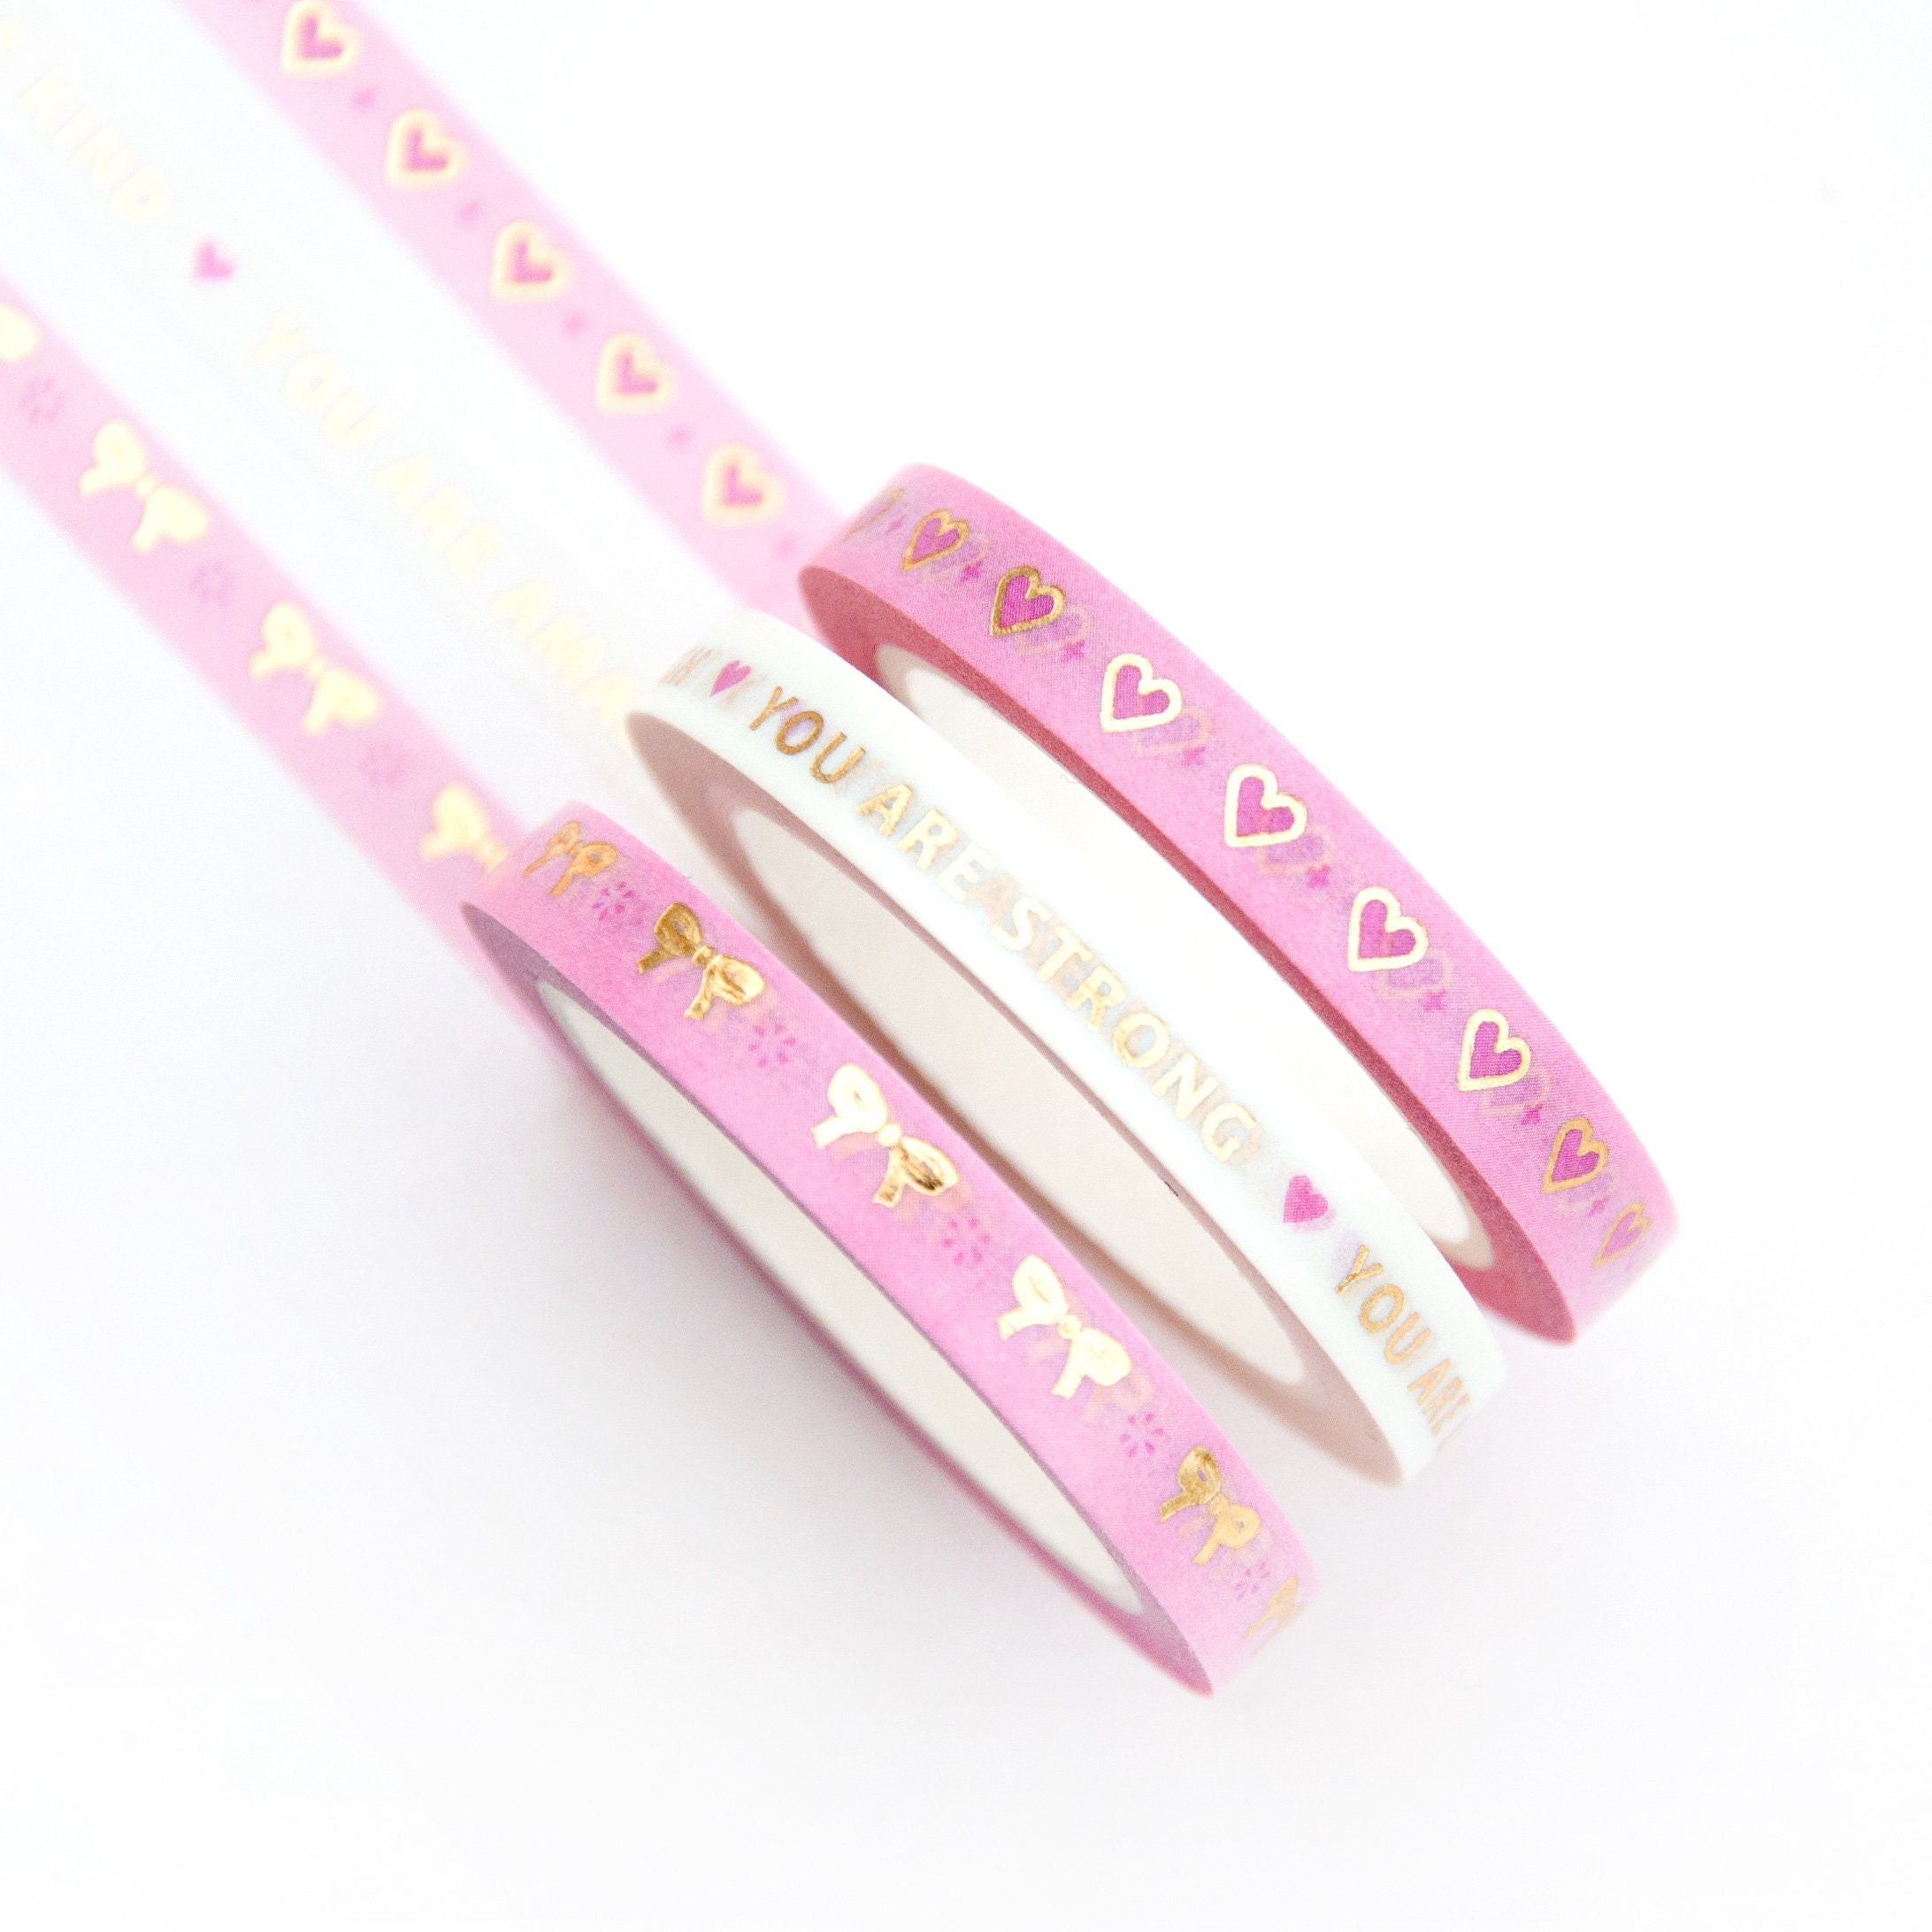 Cute Washi Tape Set of 4 Decorative Gold Blue and Pink Colors 